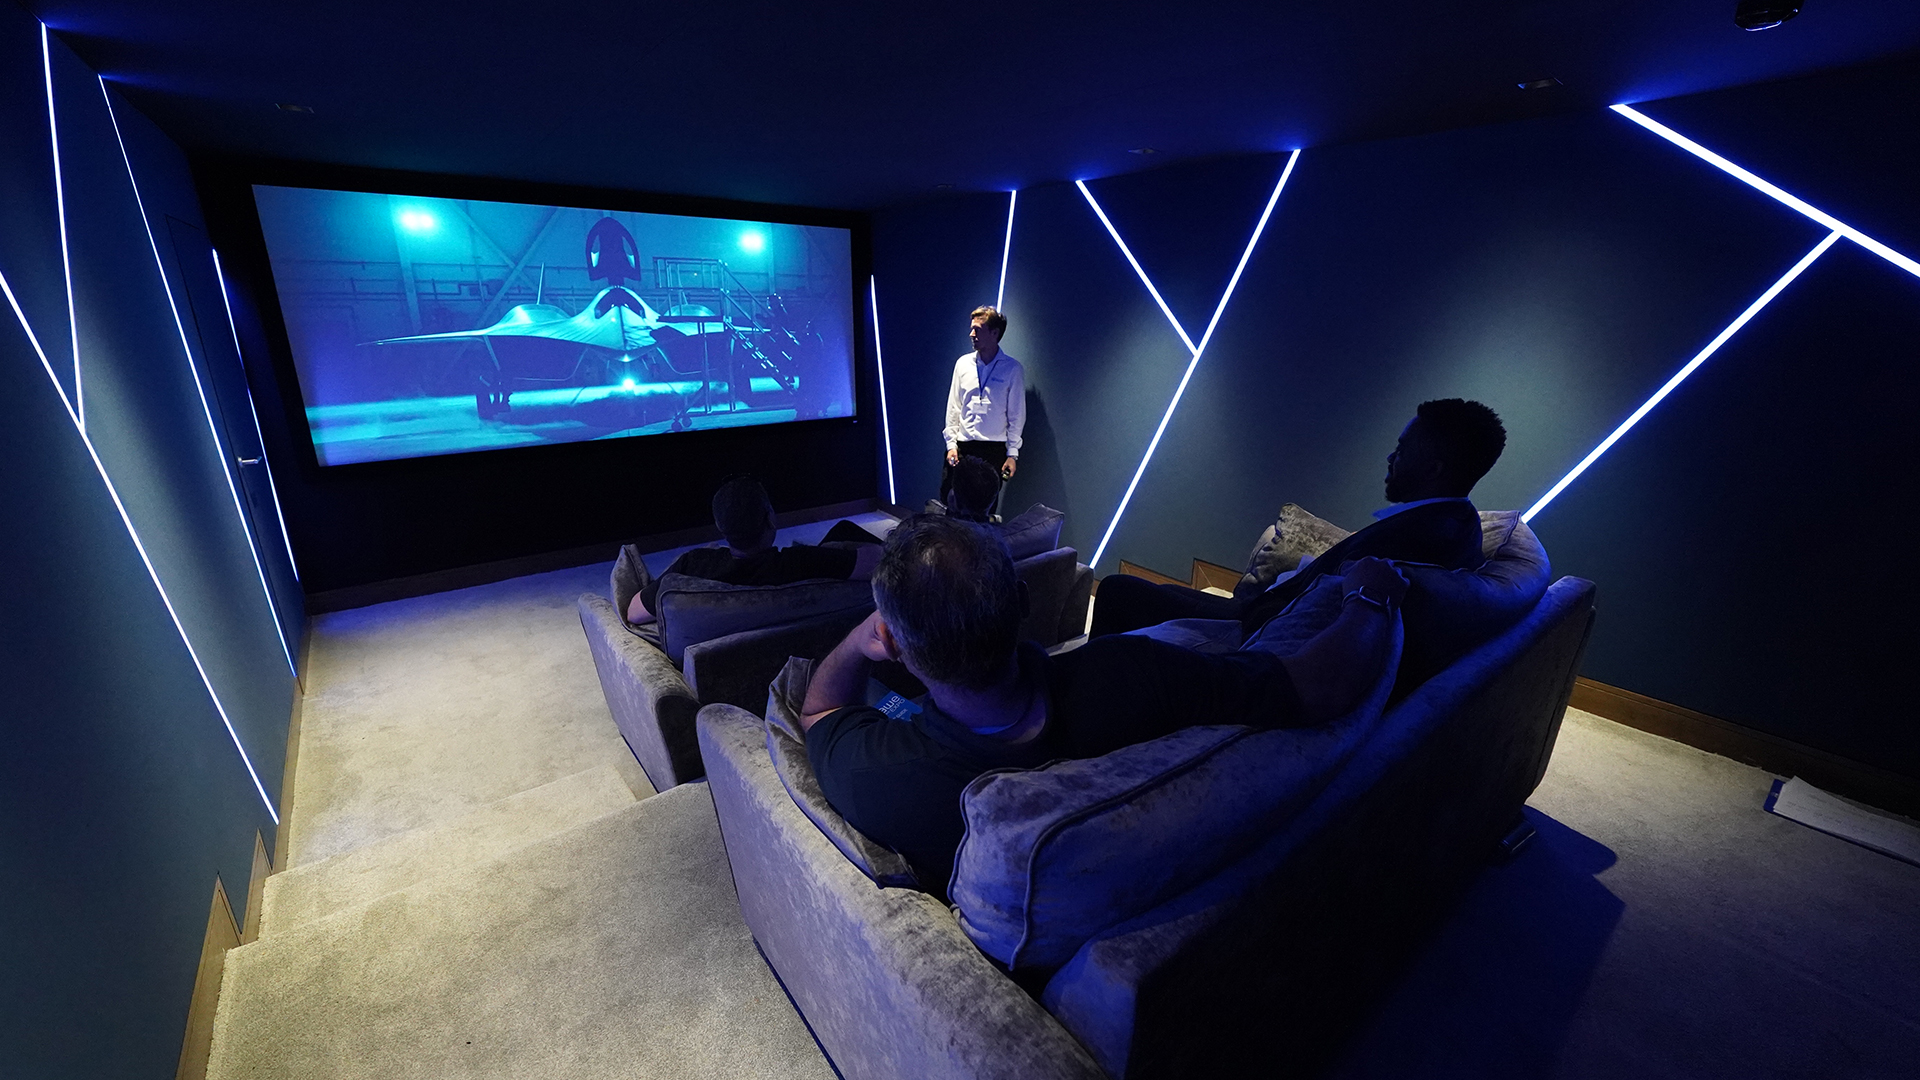 Luxury LED for Home Provides K-array for High-End Home Cinema